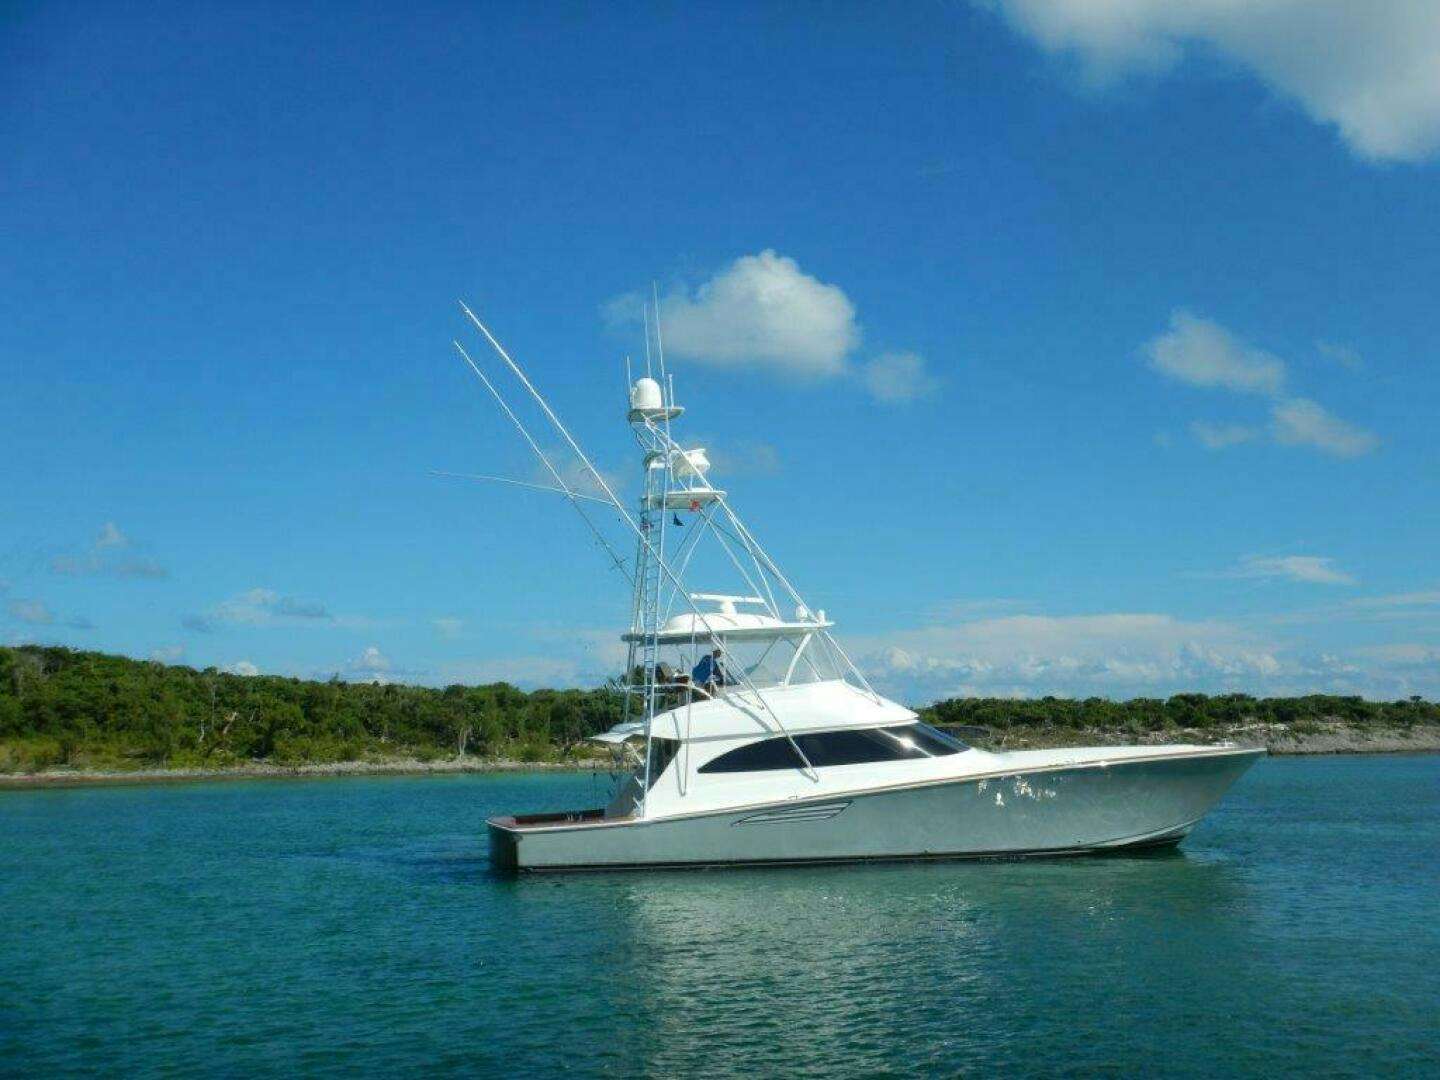 Reel drag
Yacht for Sale